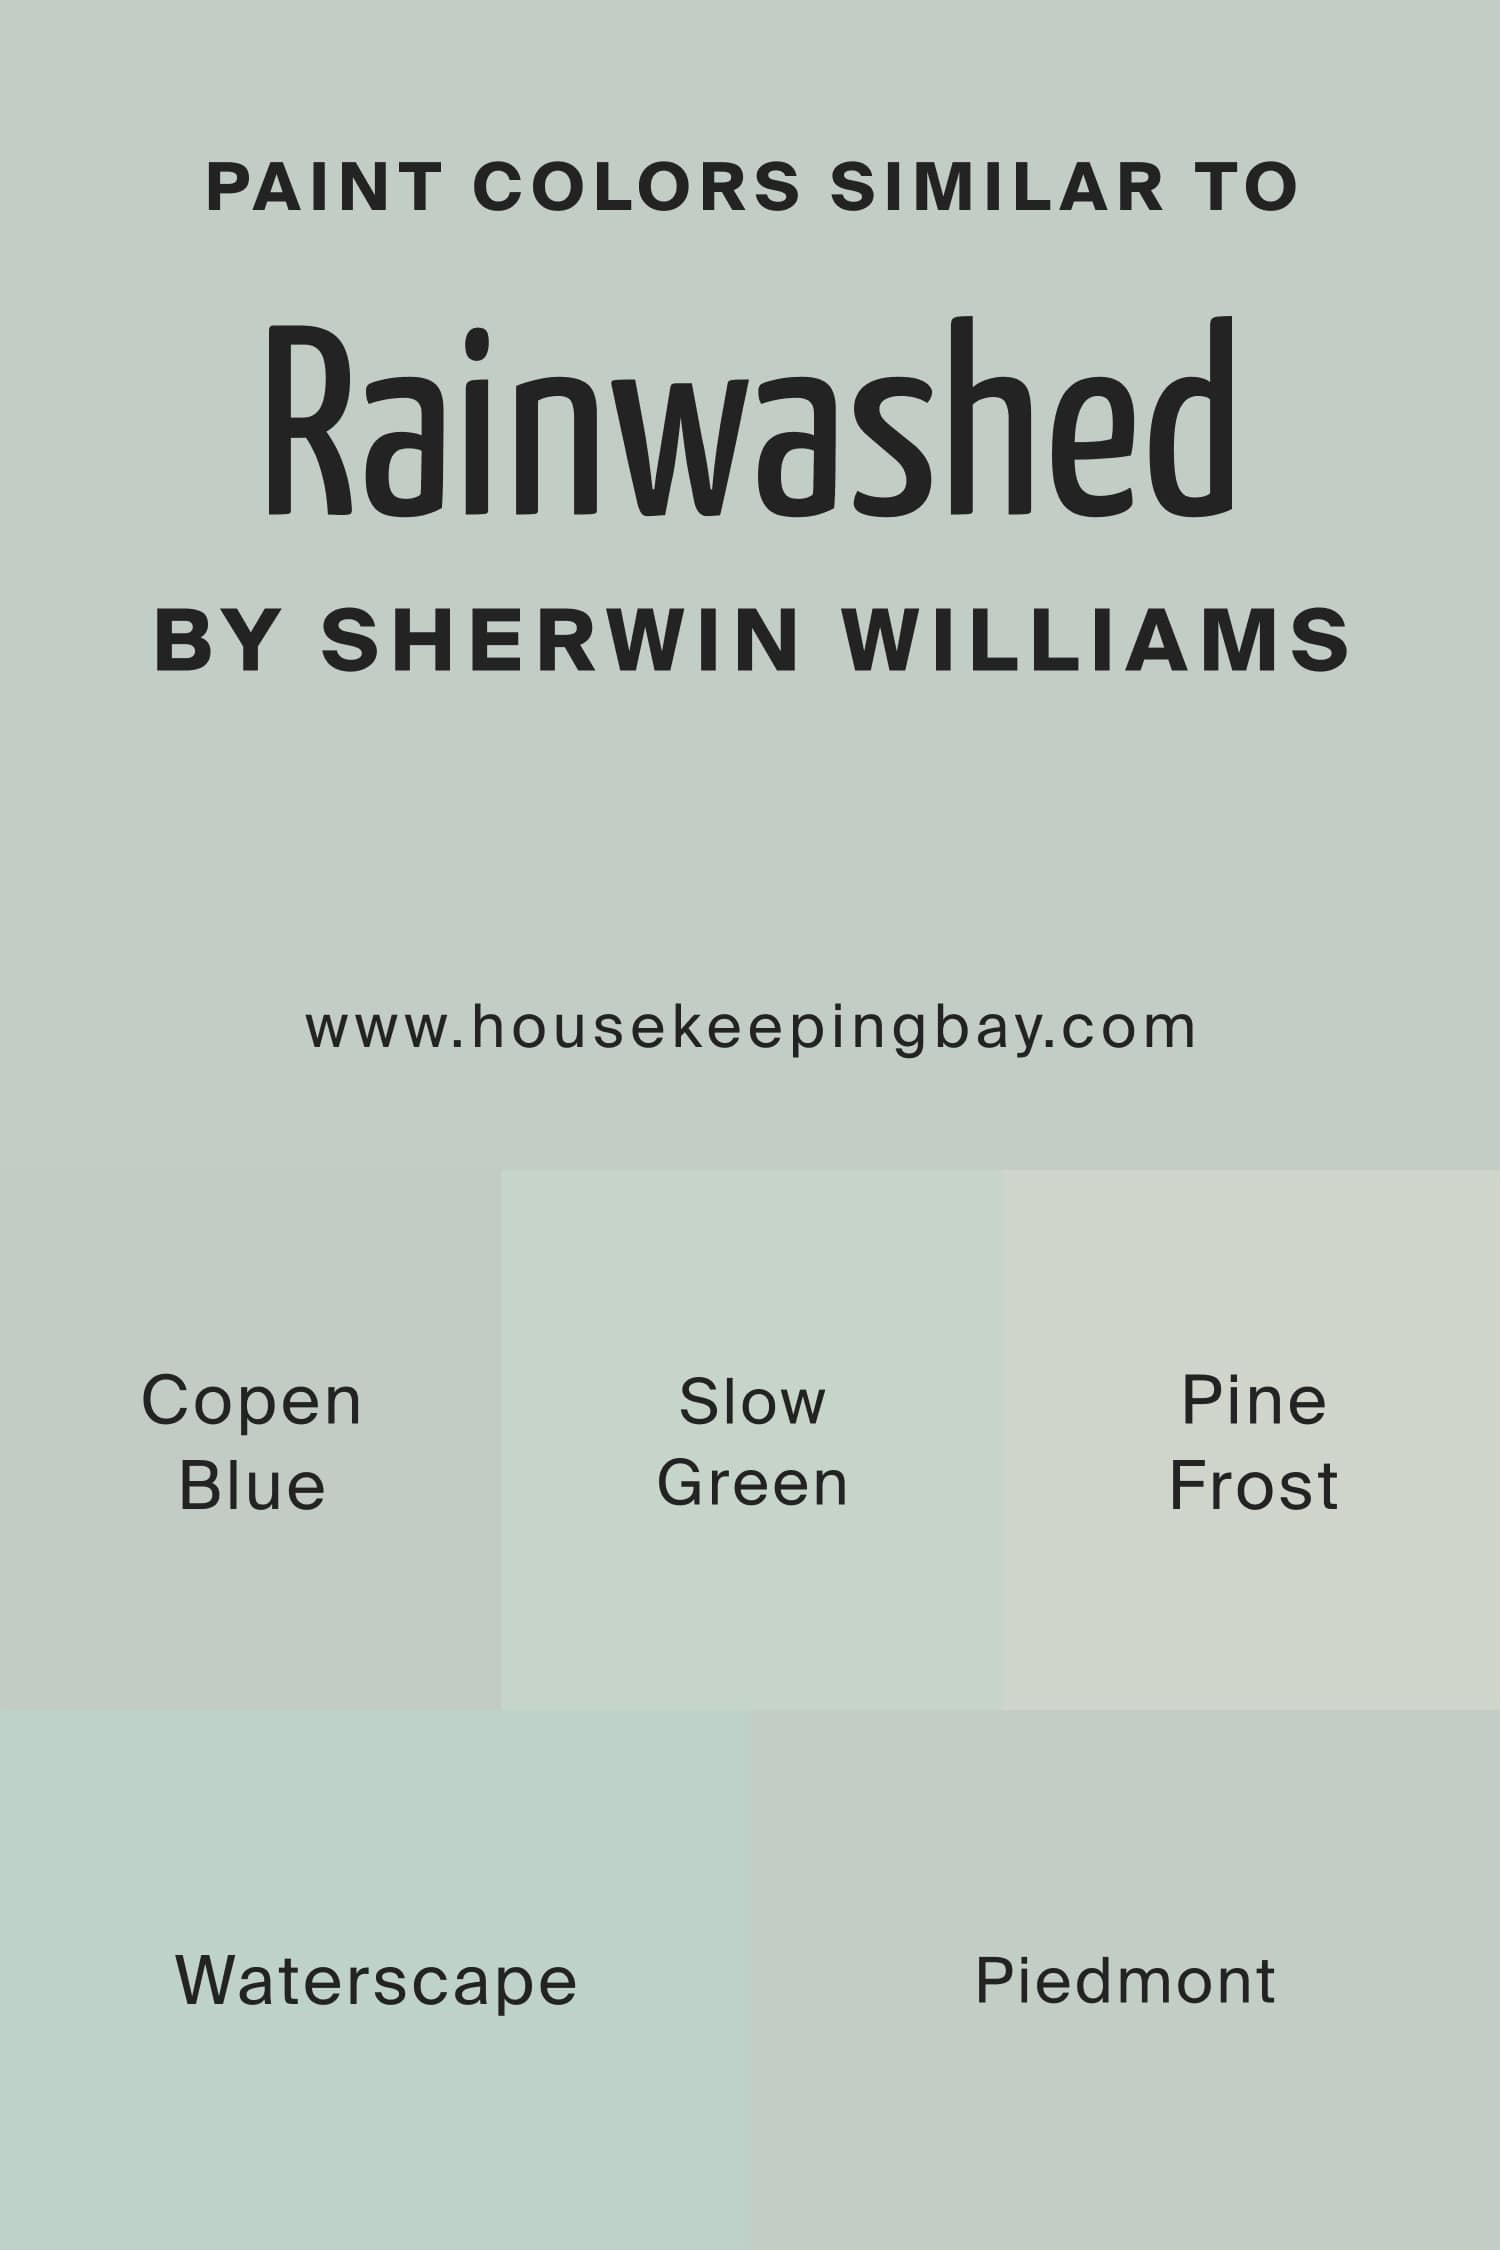 Paint Colors Similar to Rainwashed by Sherwin Williams